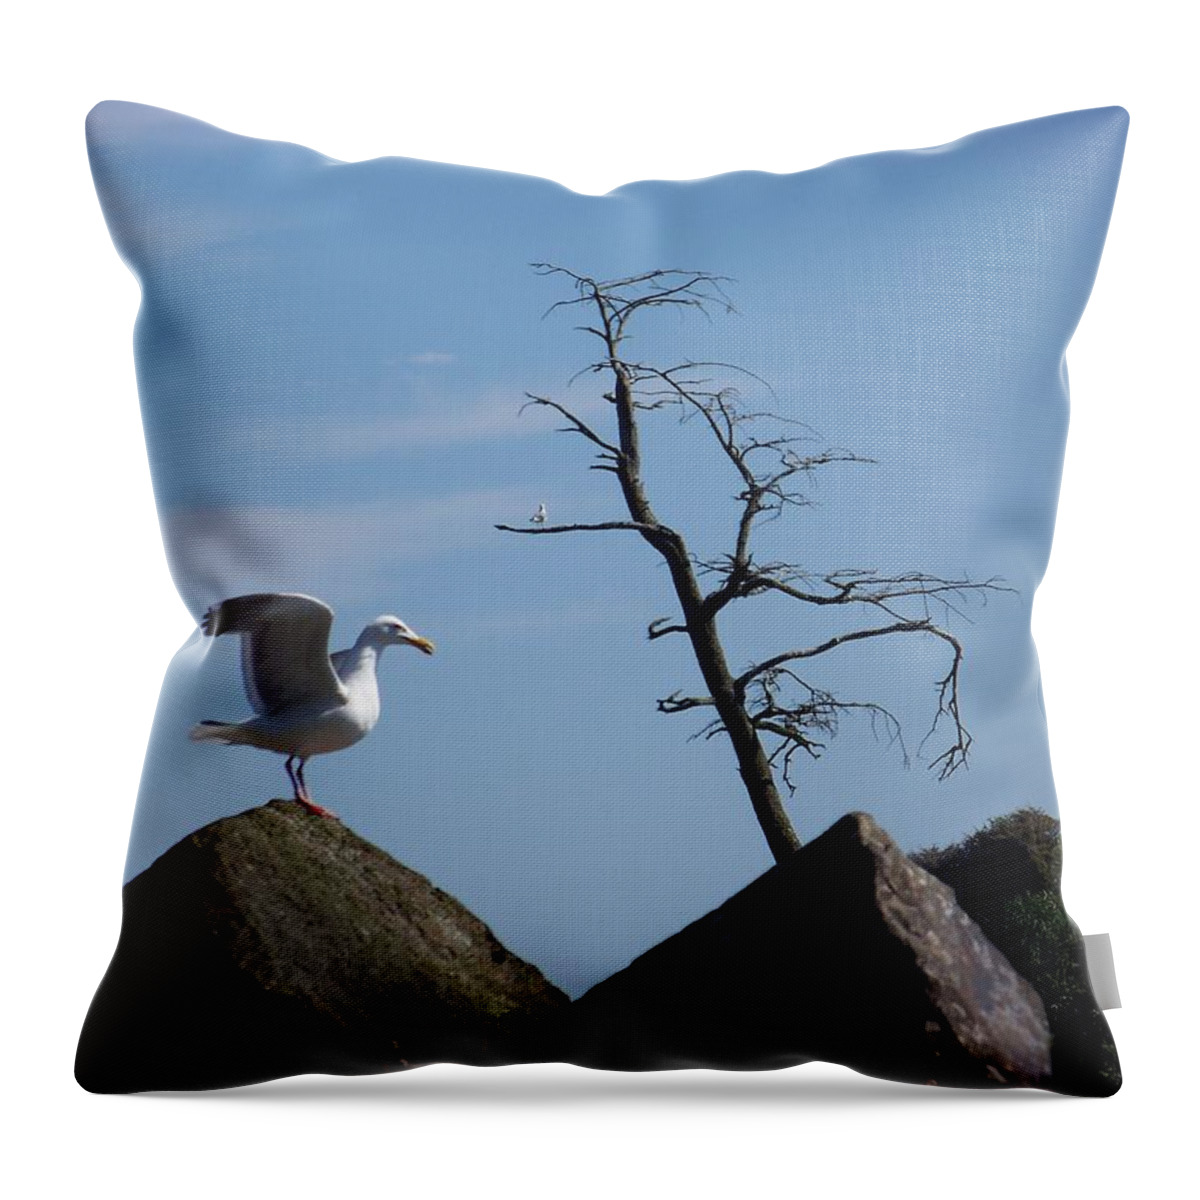 Seagulls Throw Pillow featuring the photograph Come Fly With Me by Julie Rauscher